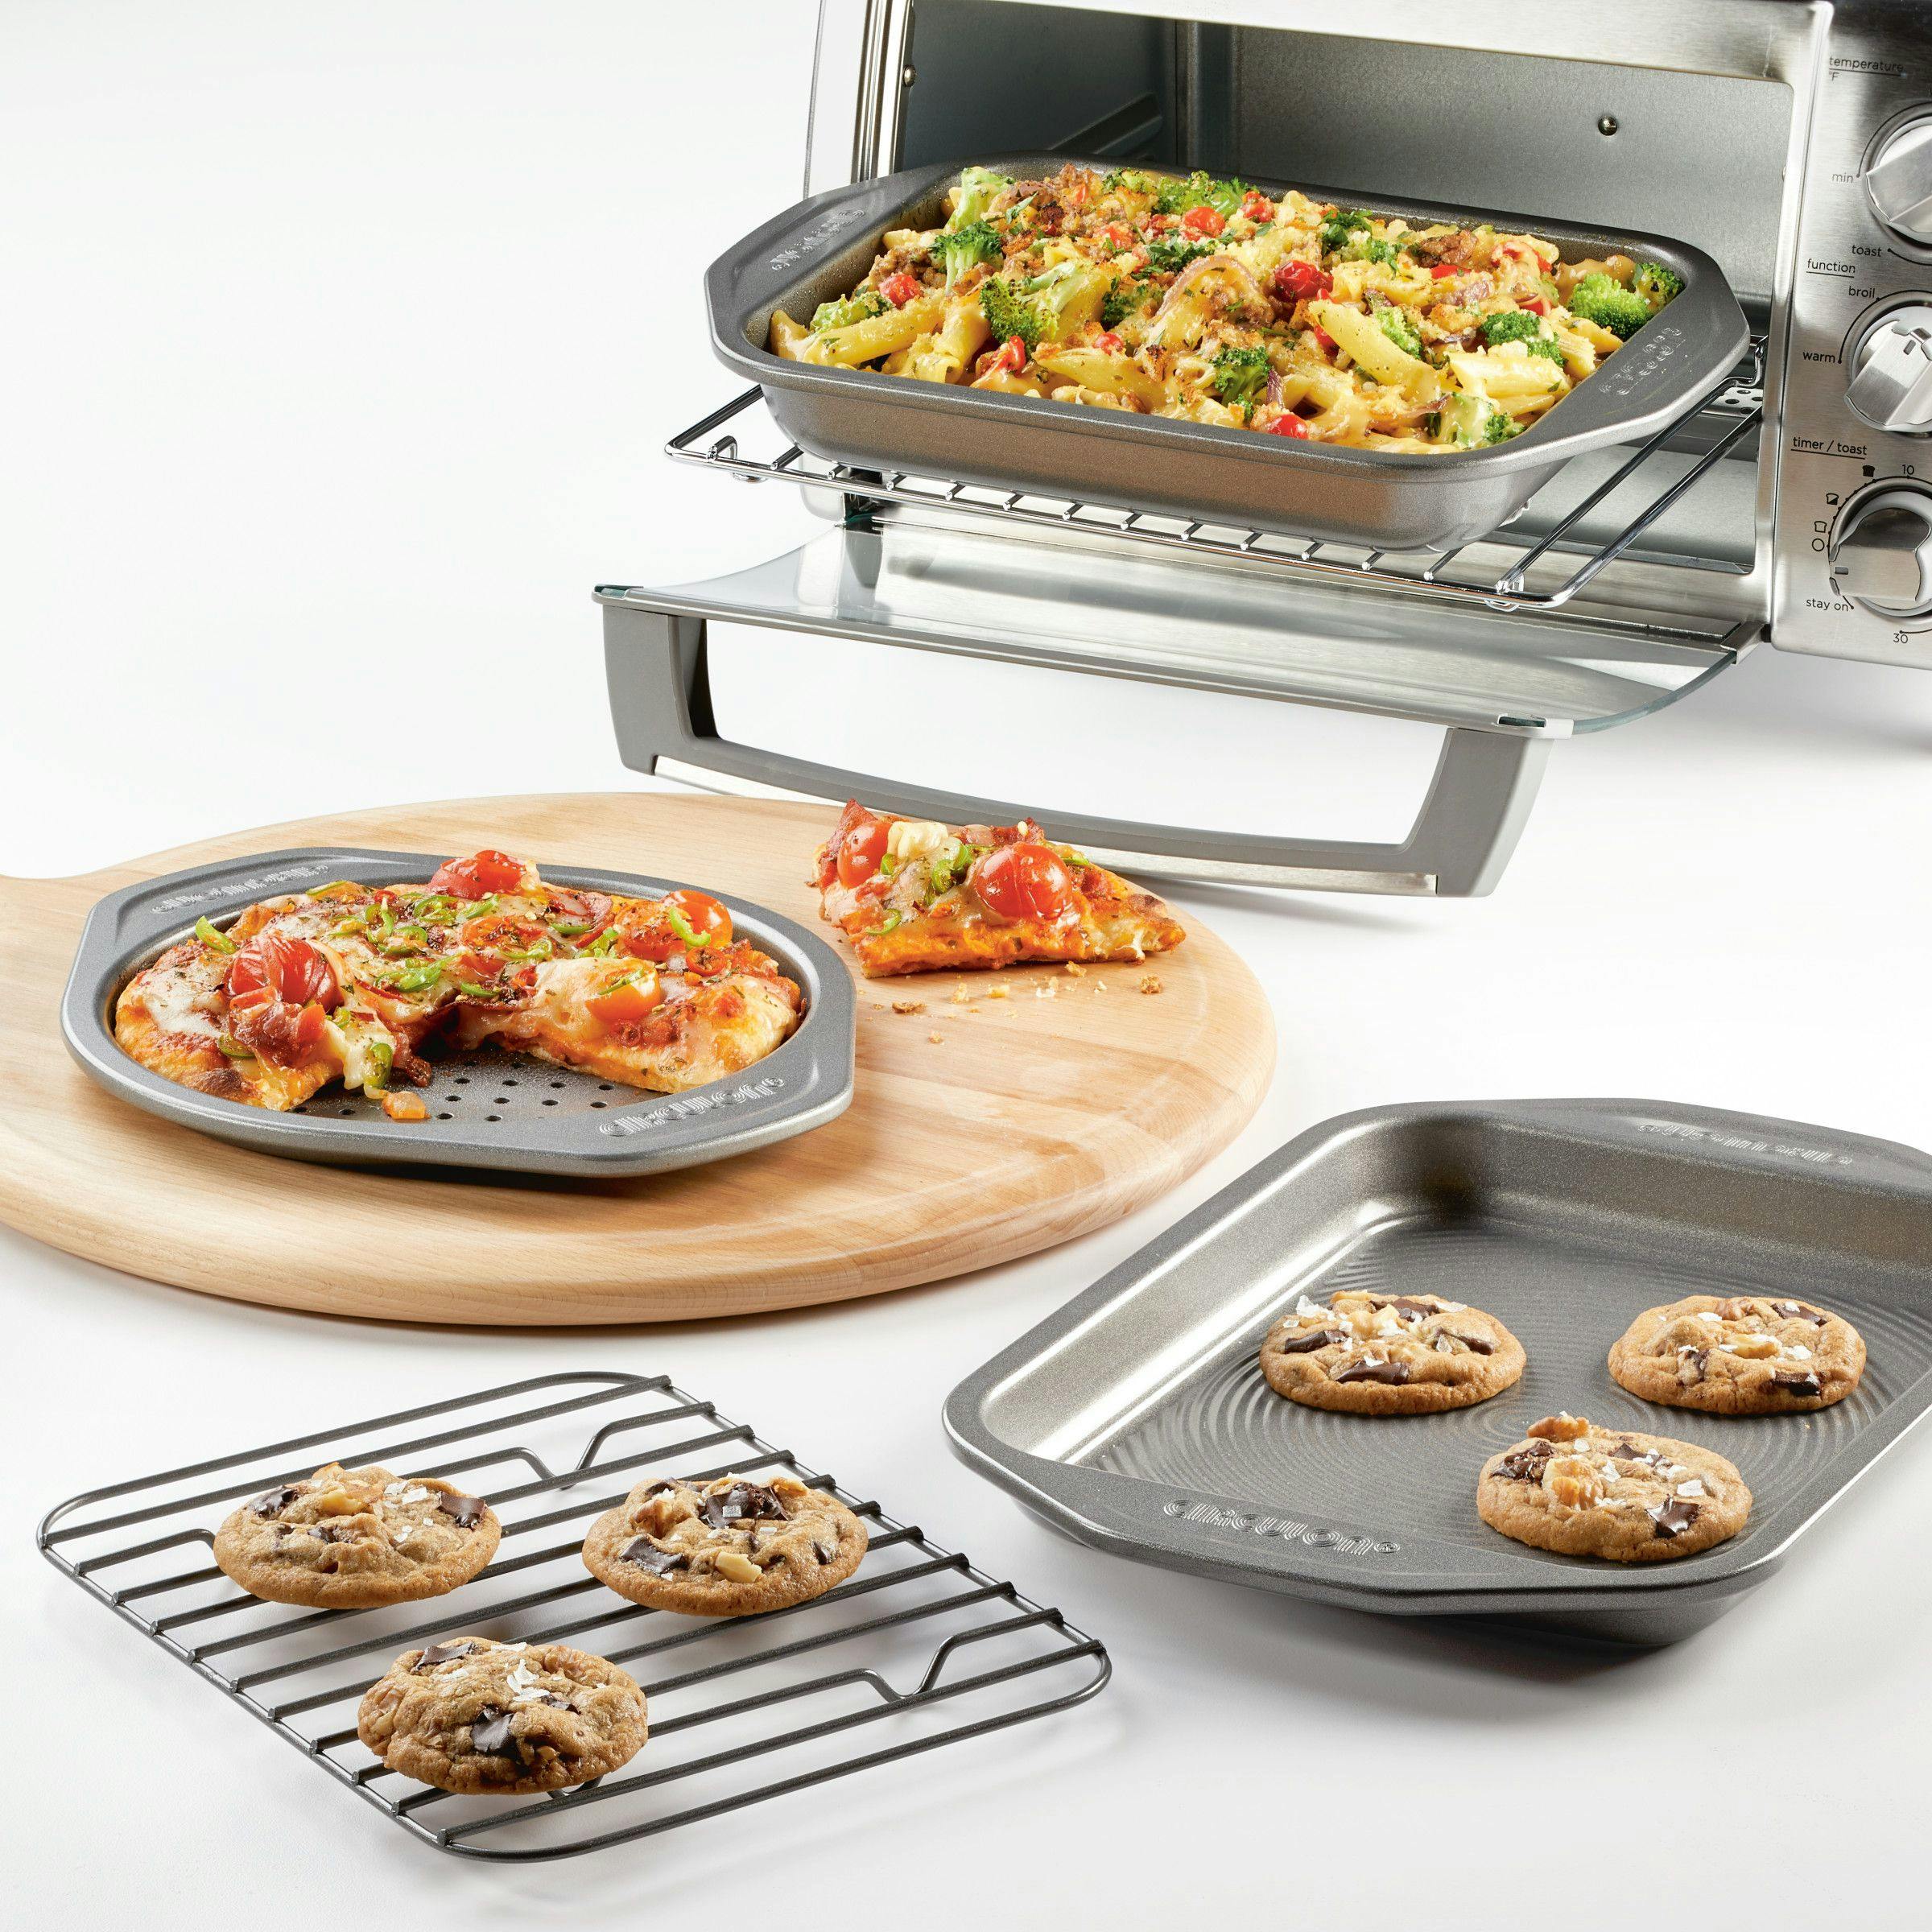 Circulon Total Bakeware Nonstick Toaster Oven and Personal Pizza Pan Baking Set, 4-Piece, Gray